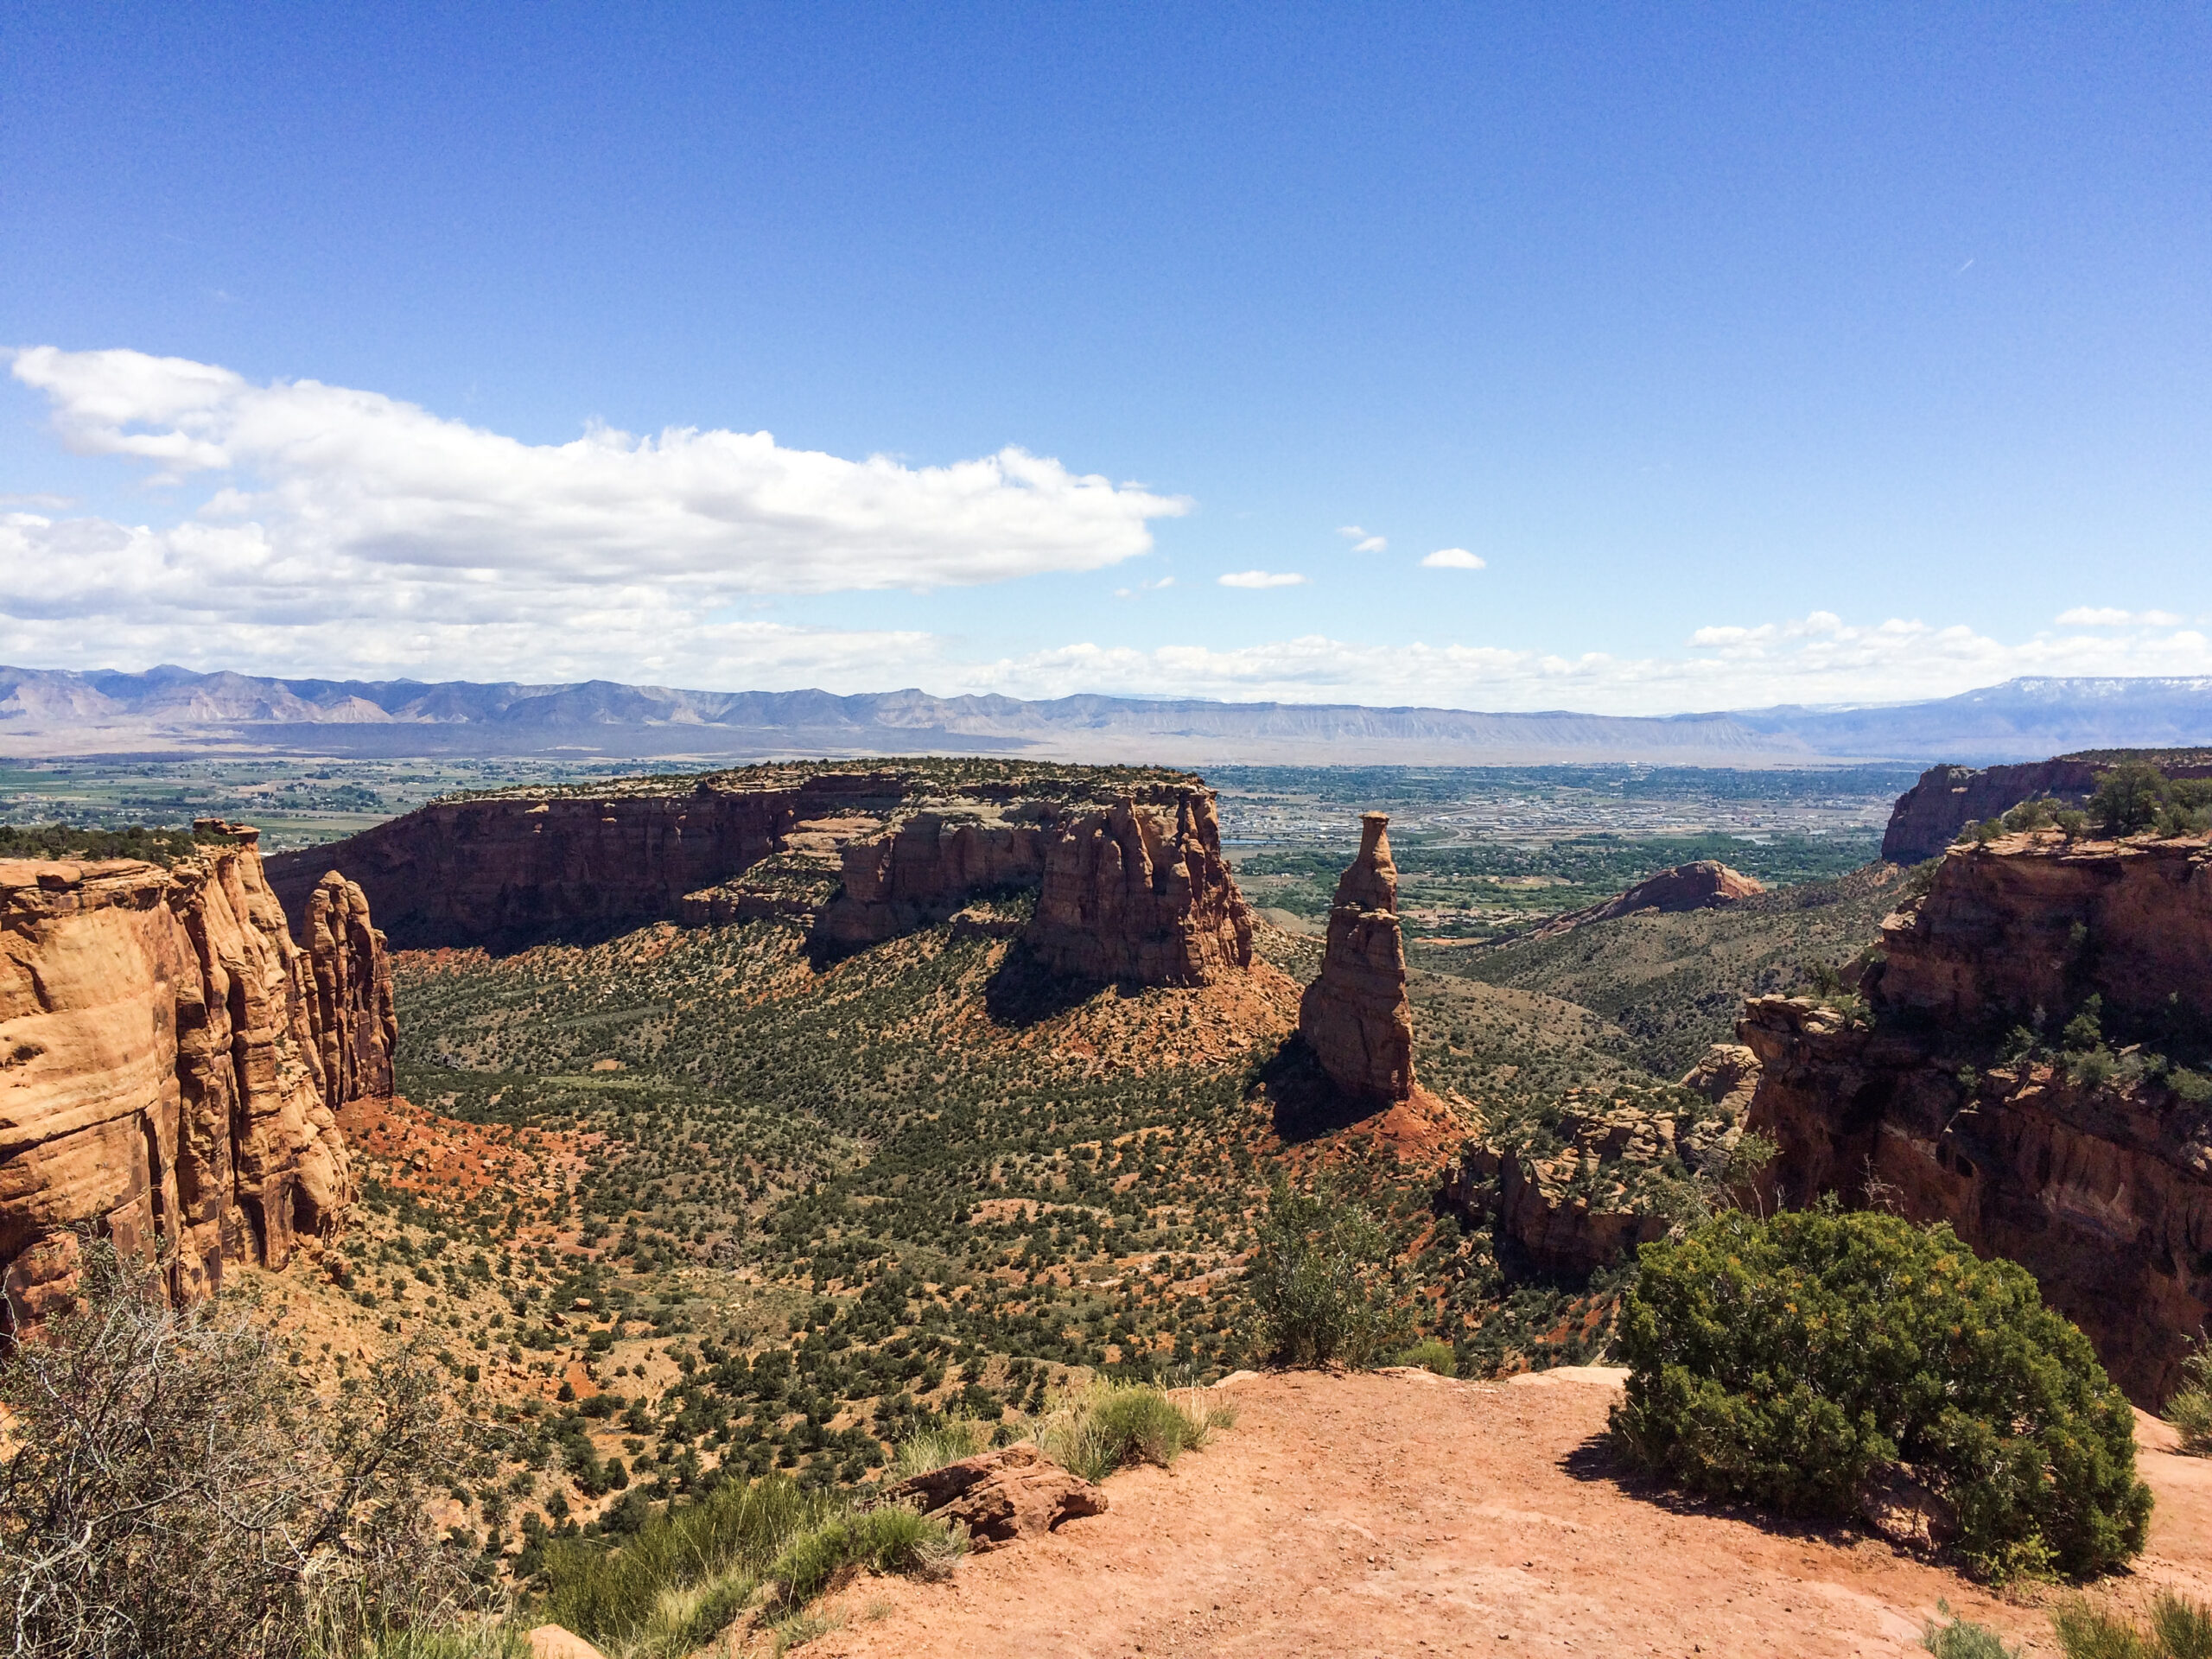 Views from the scenic Rim Rock Drive on the Colorado National Monument